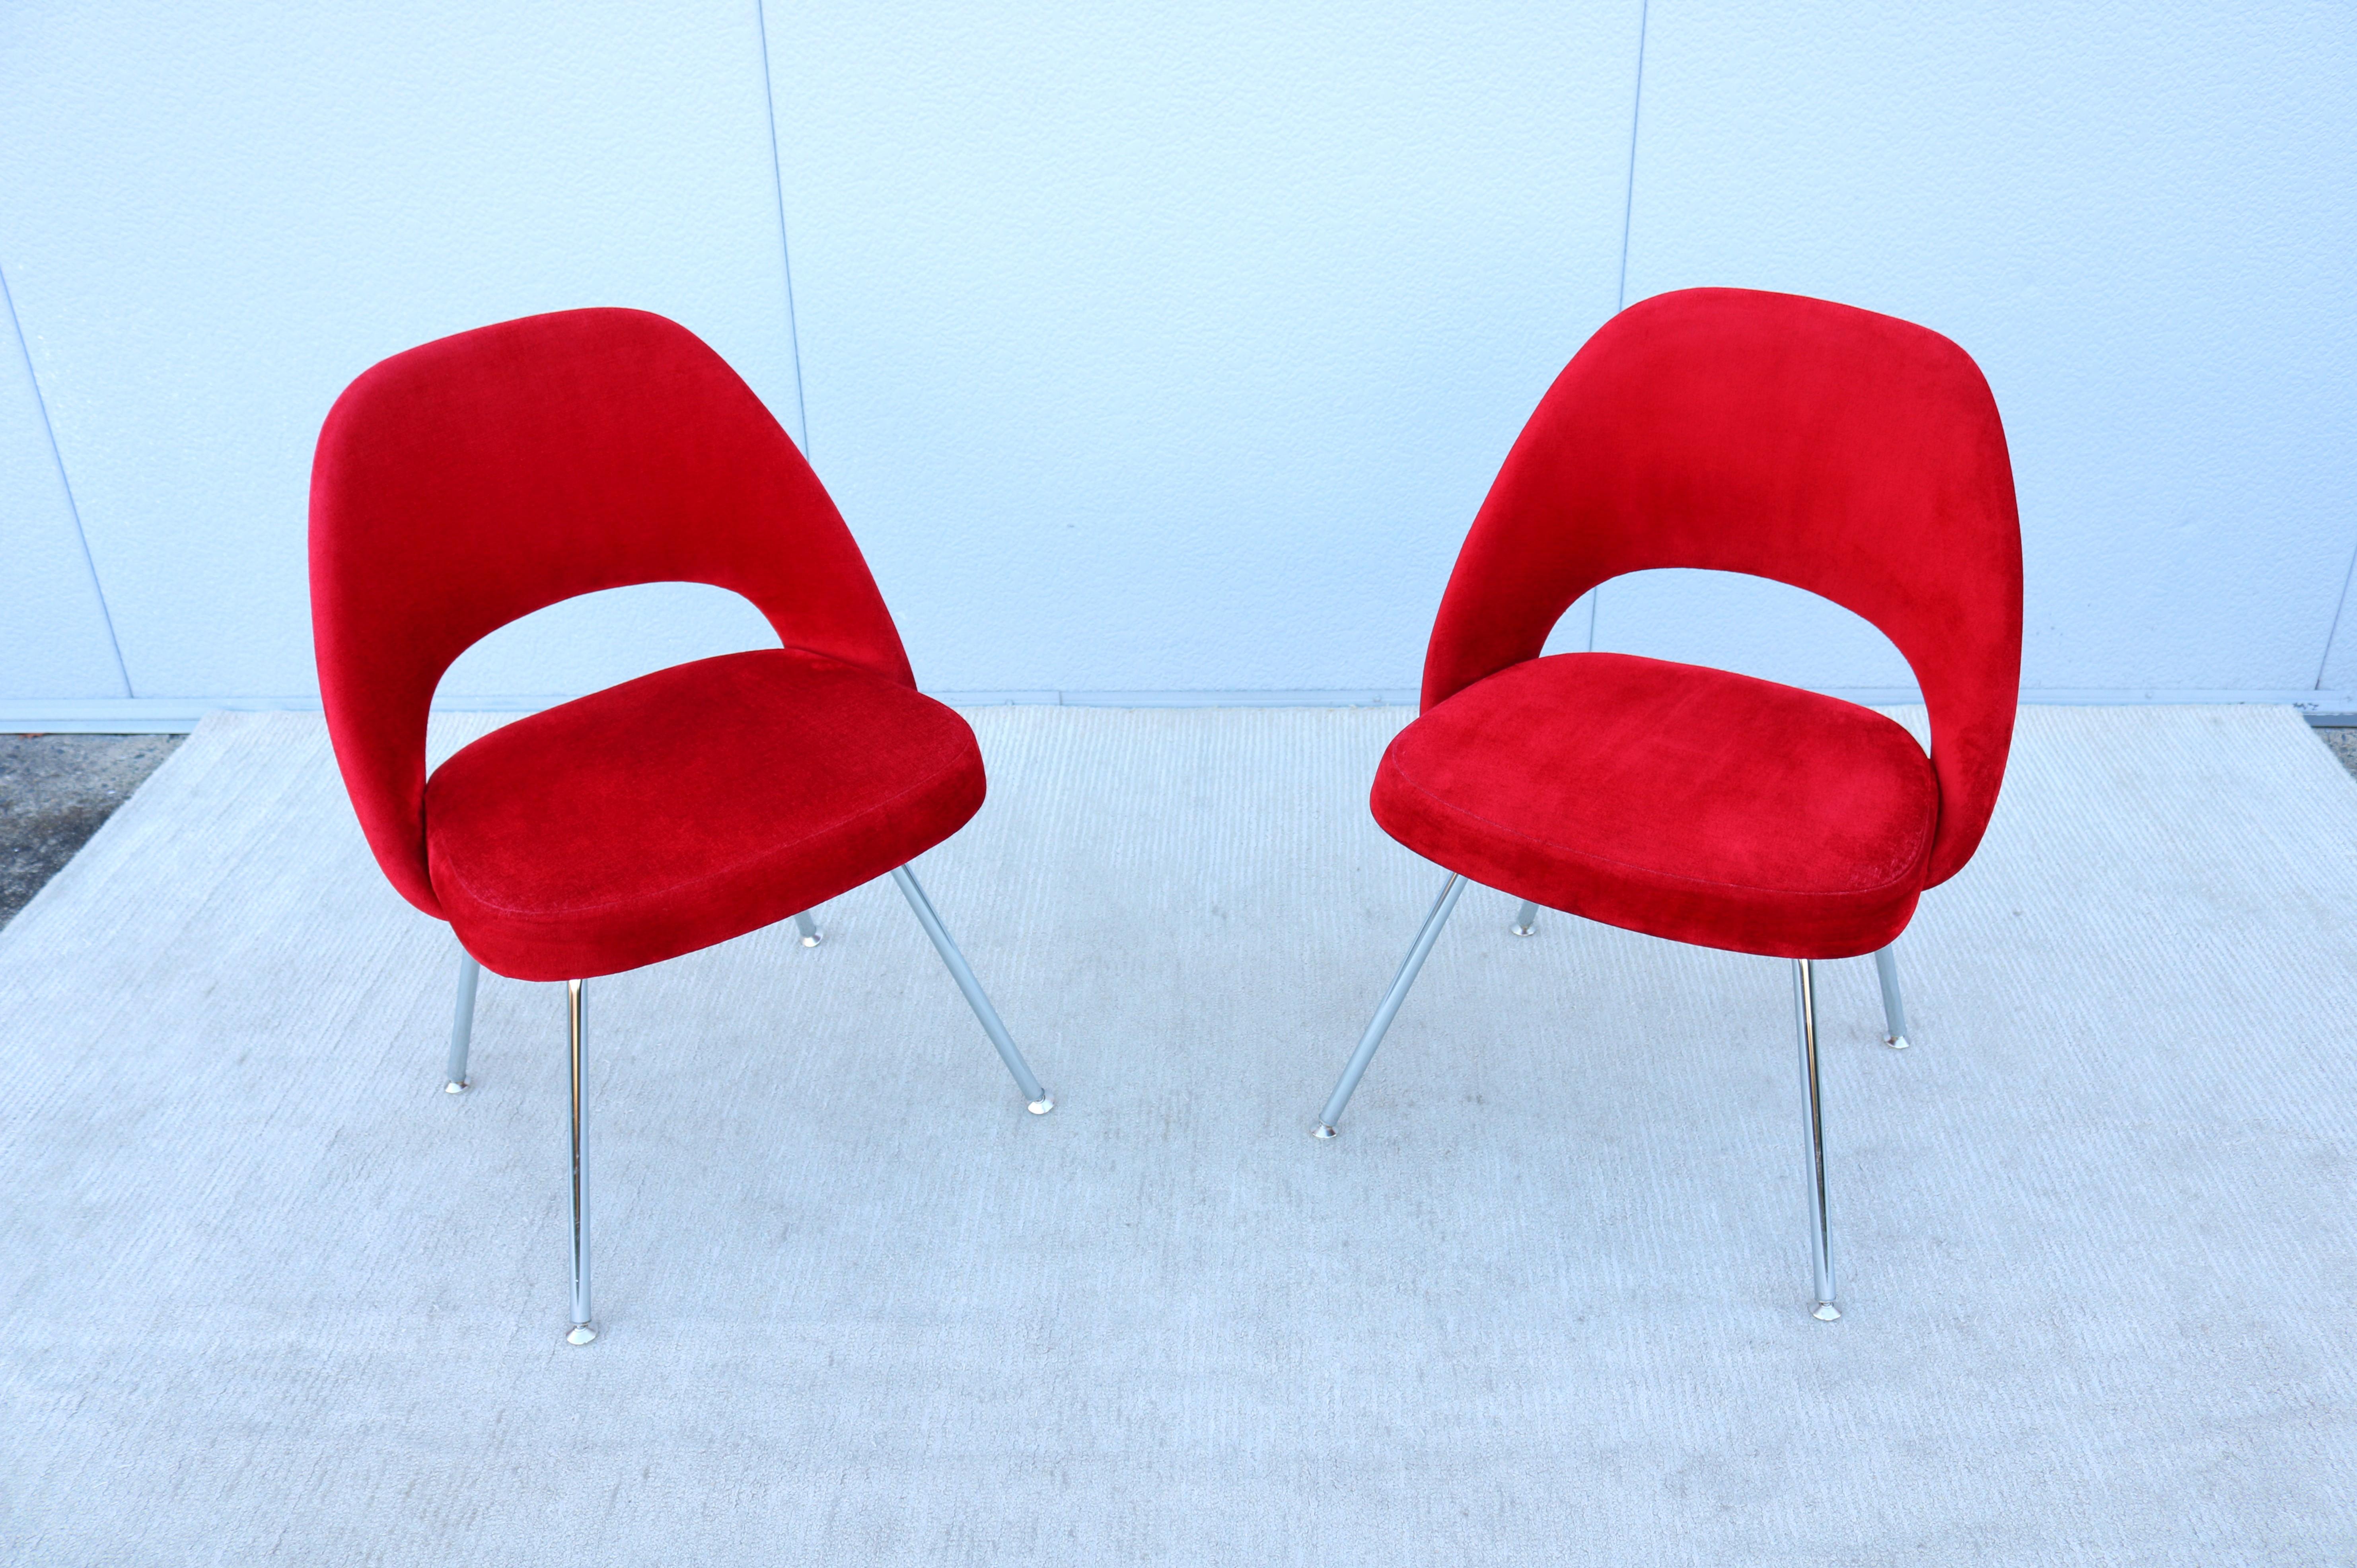 Molded Mid-Century Modern Eero Saarinen for Knoll Red Executive Armless Chairs - a Pair For Sale